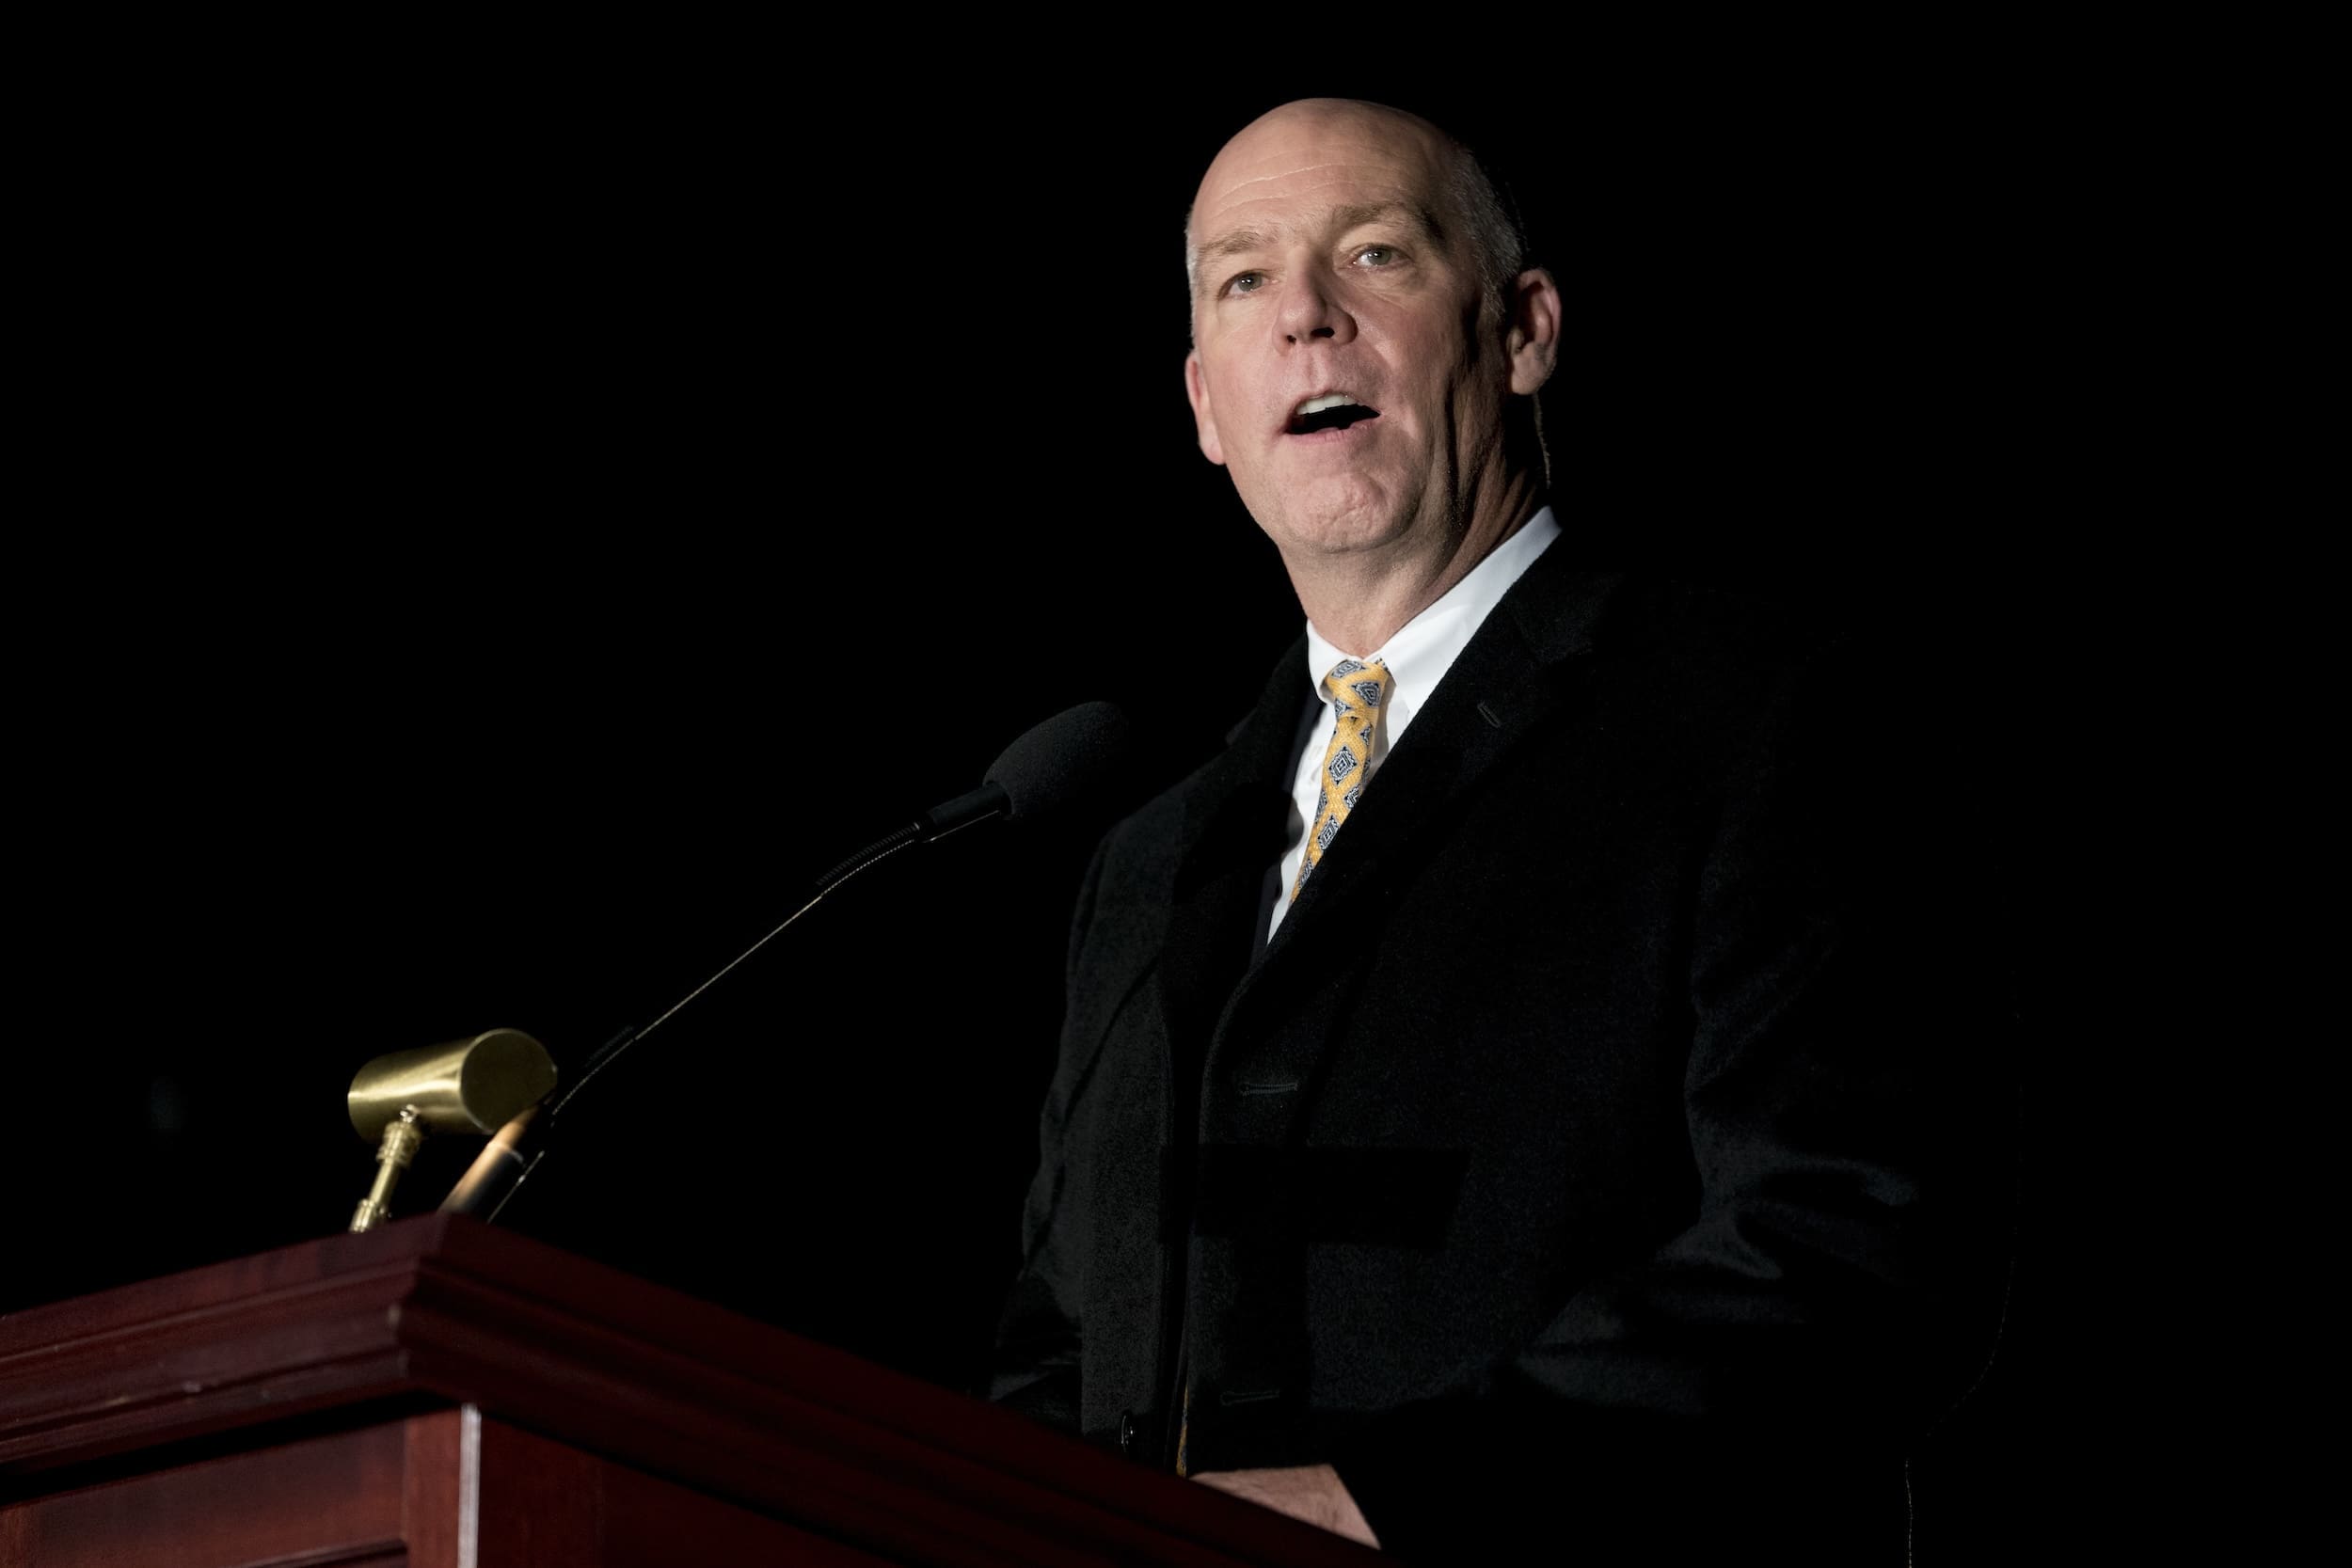 Greg Gianforte speaks during the 2017 Capitol Christmas Tree lighting ceremony on the West Lawn of the U.S. Capitol in Washington. (AP Photo/Andrew Harnik, File)